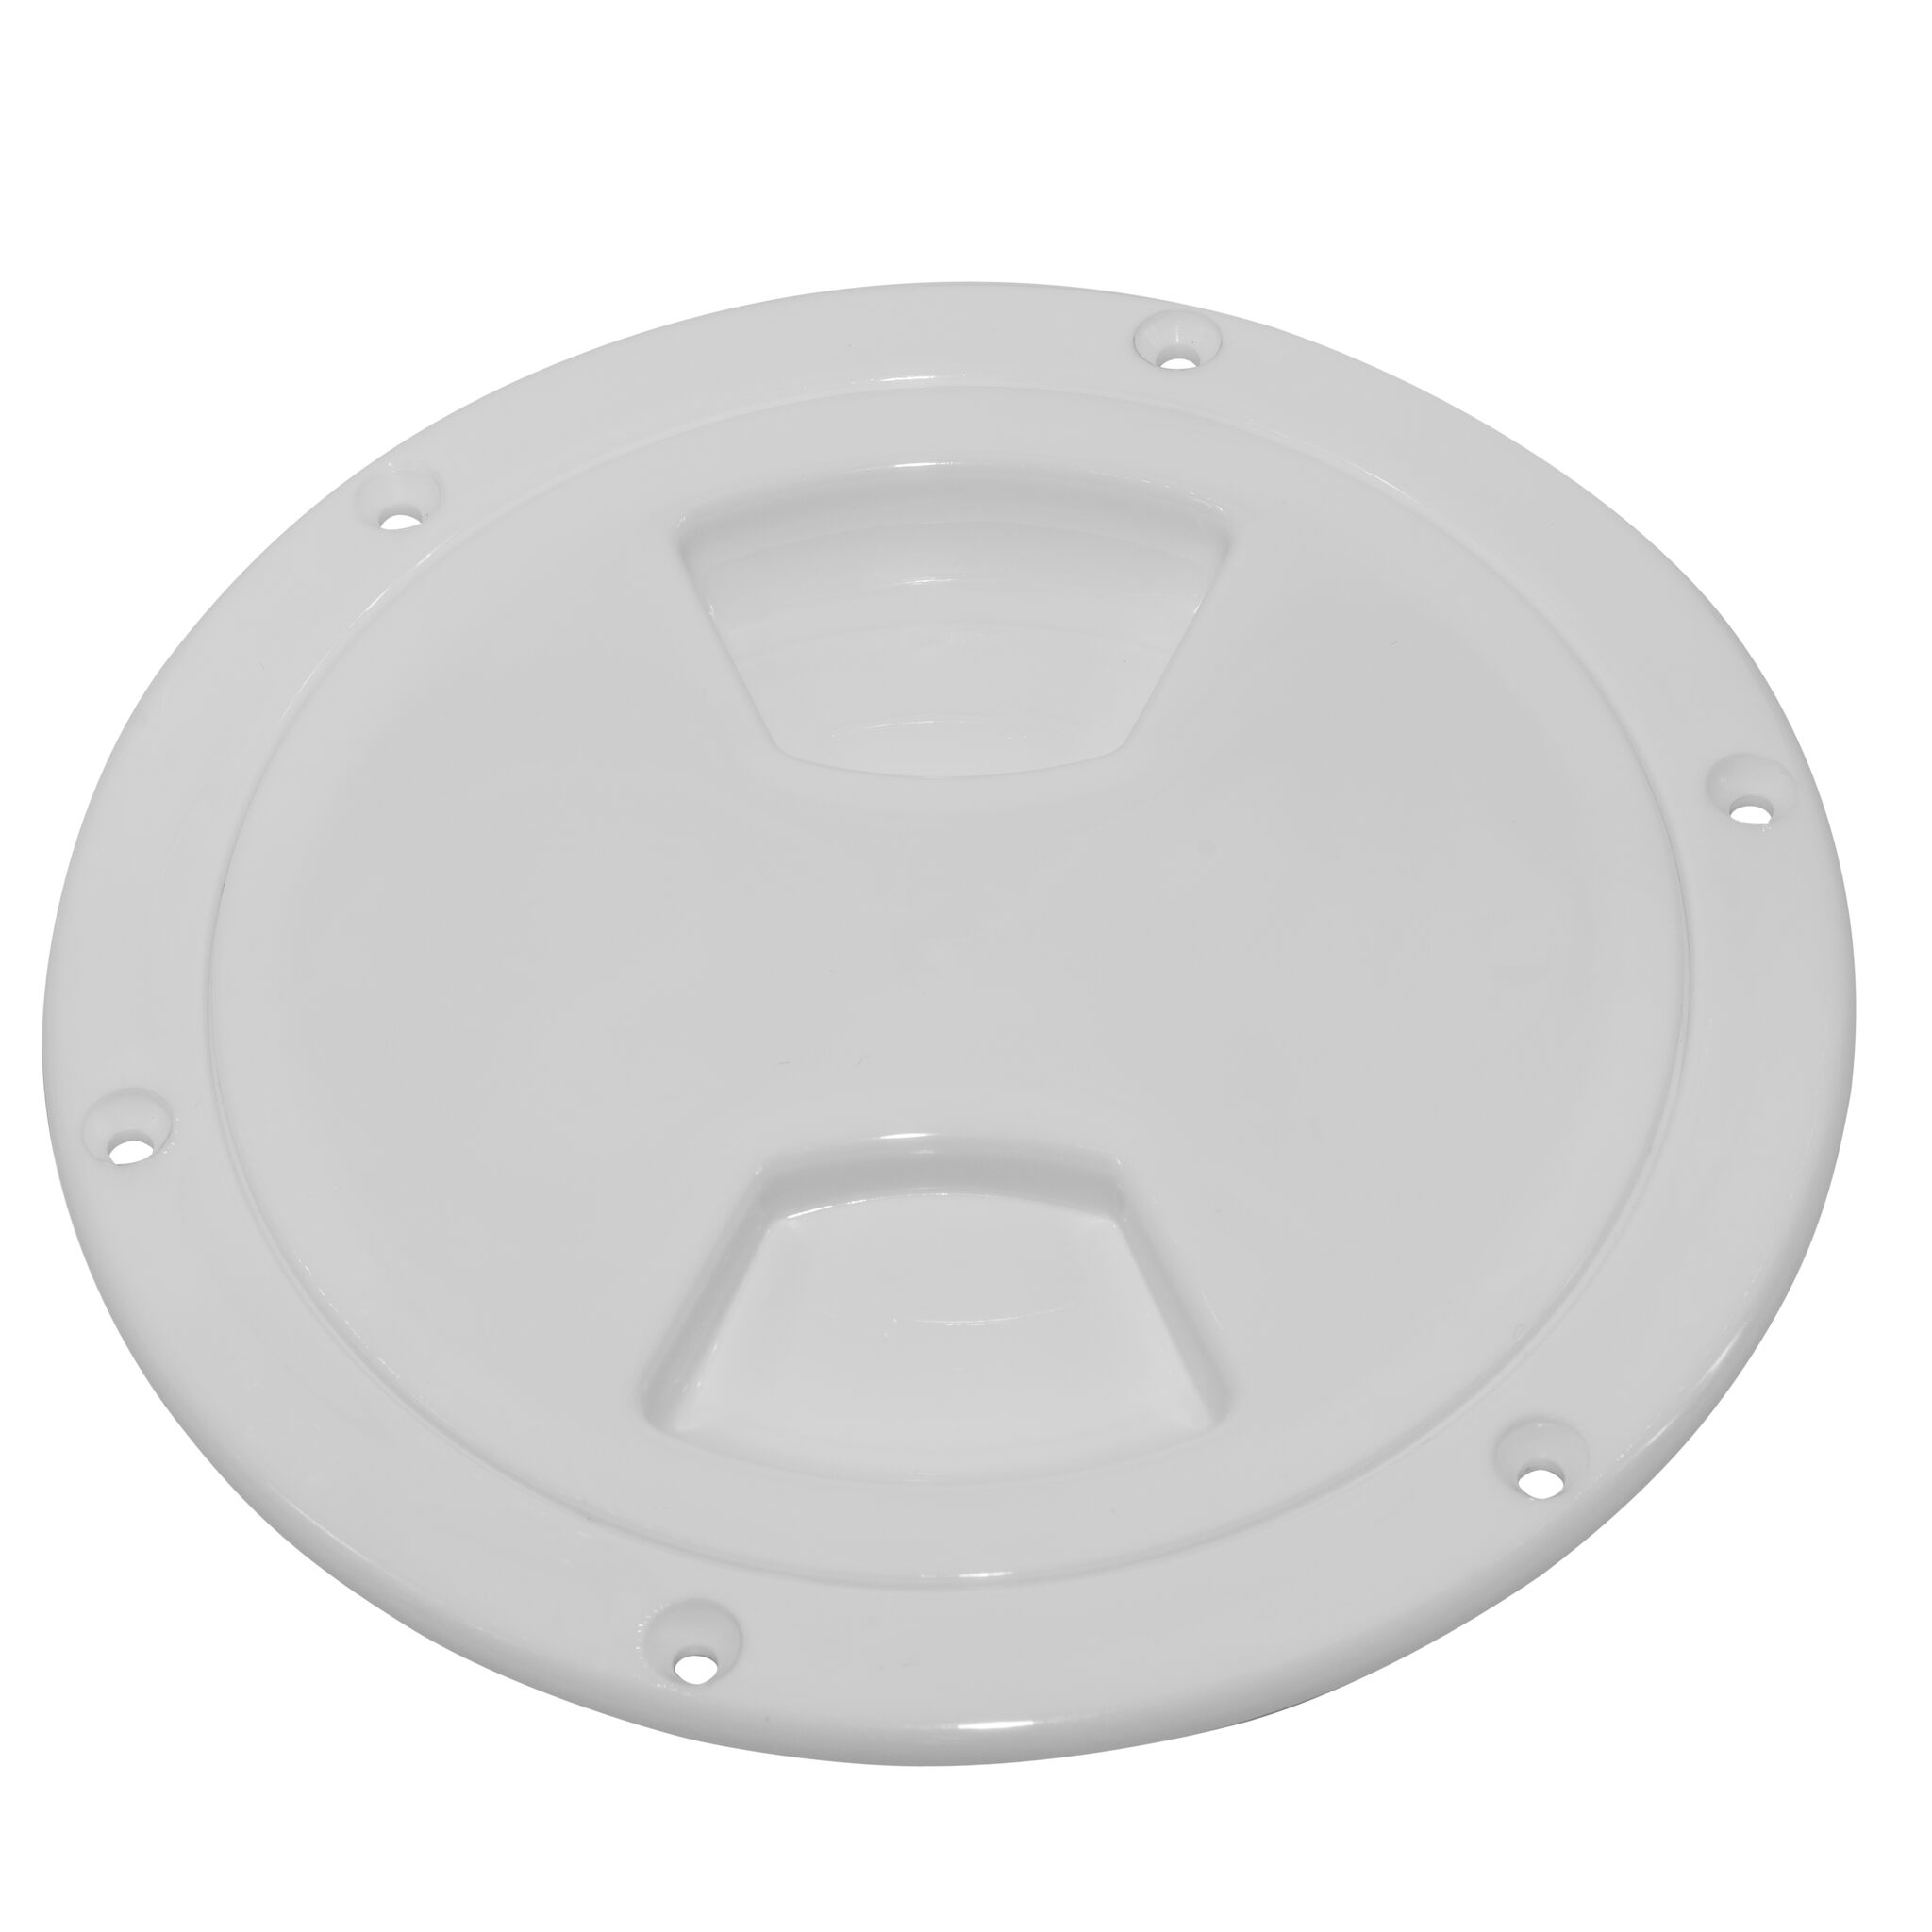 Inspection cover with screw cap